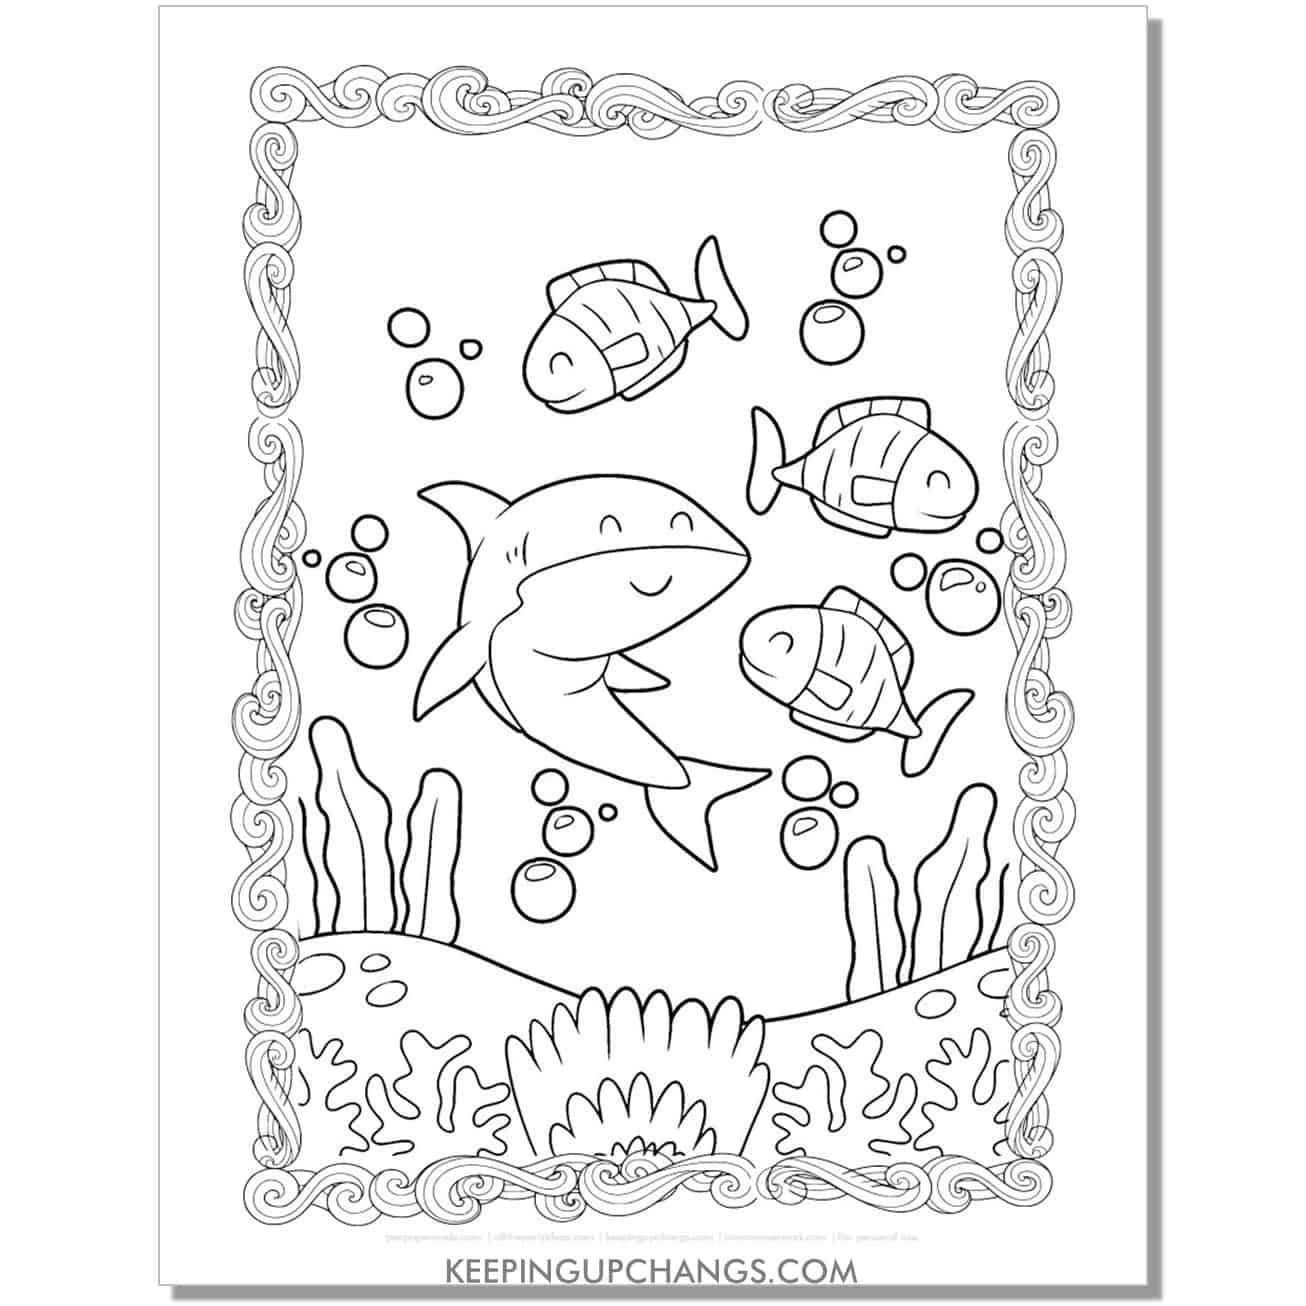 free shark with school of fish coloring page, sheet.